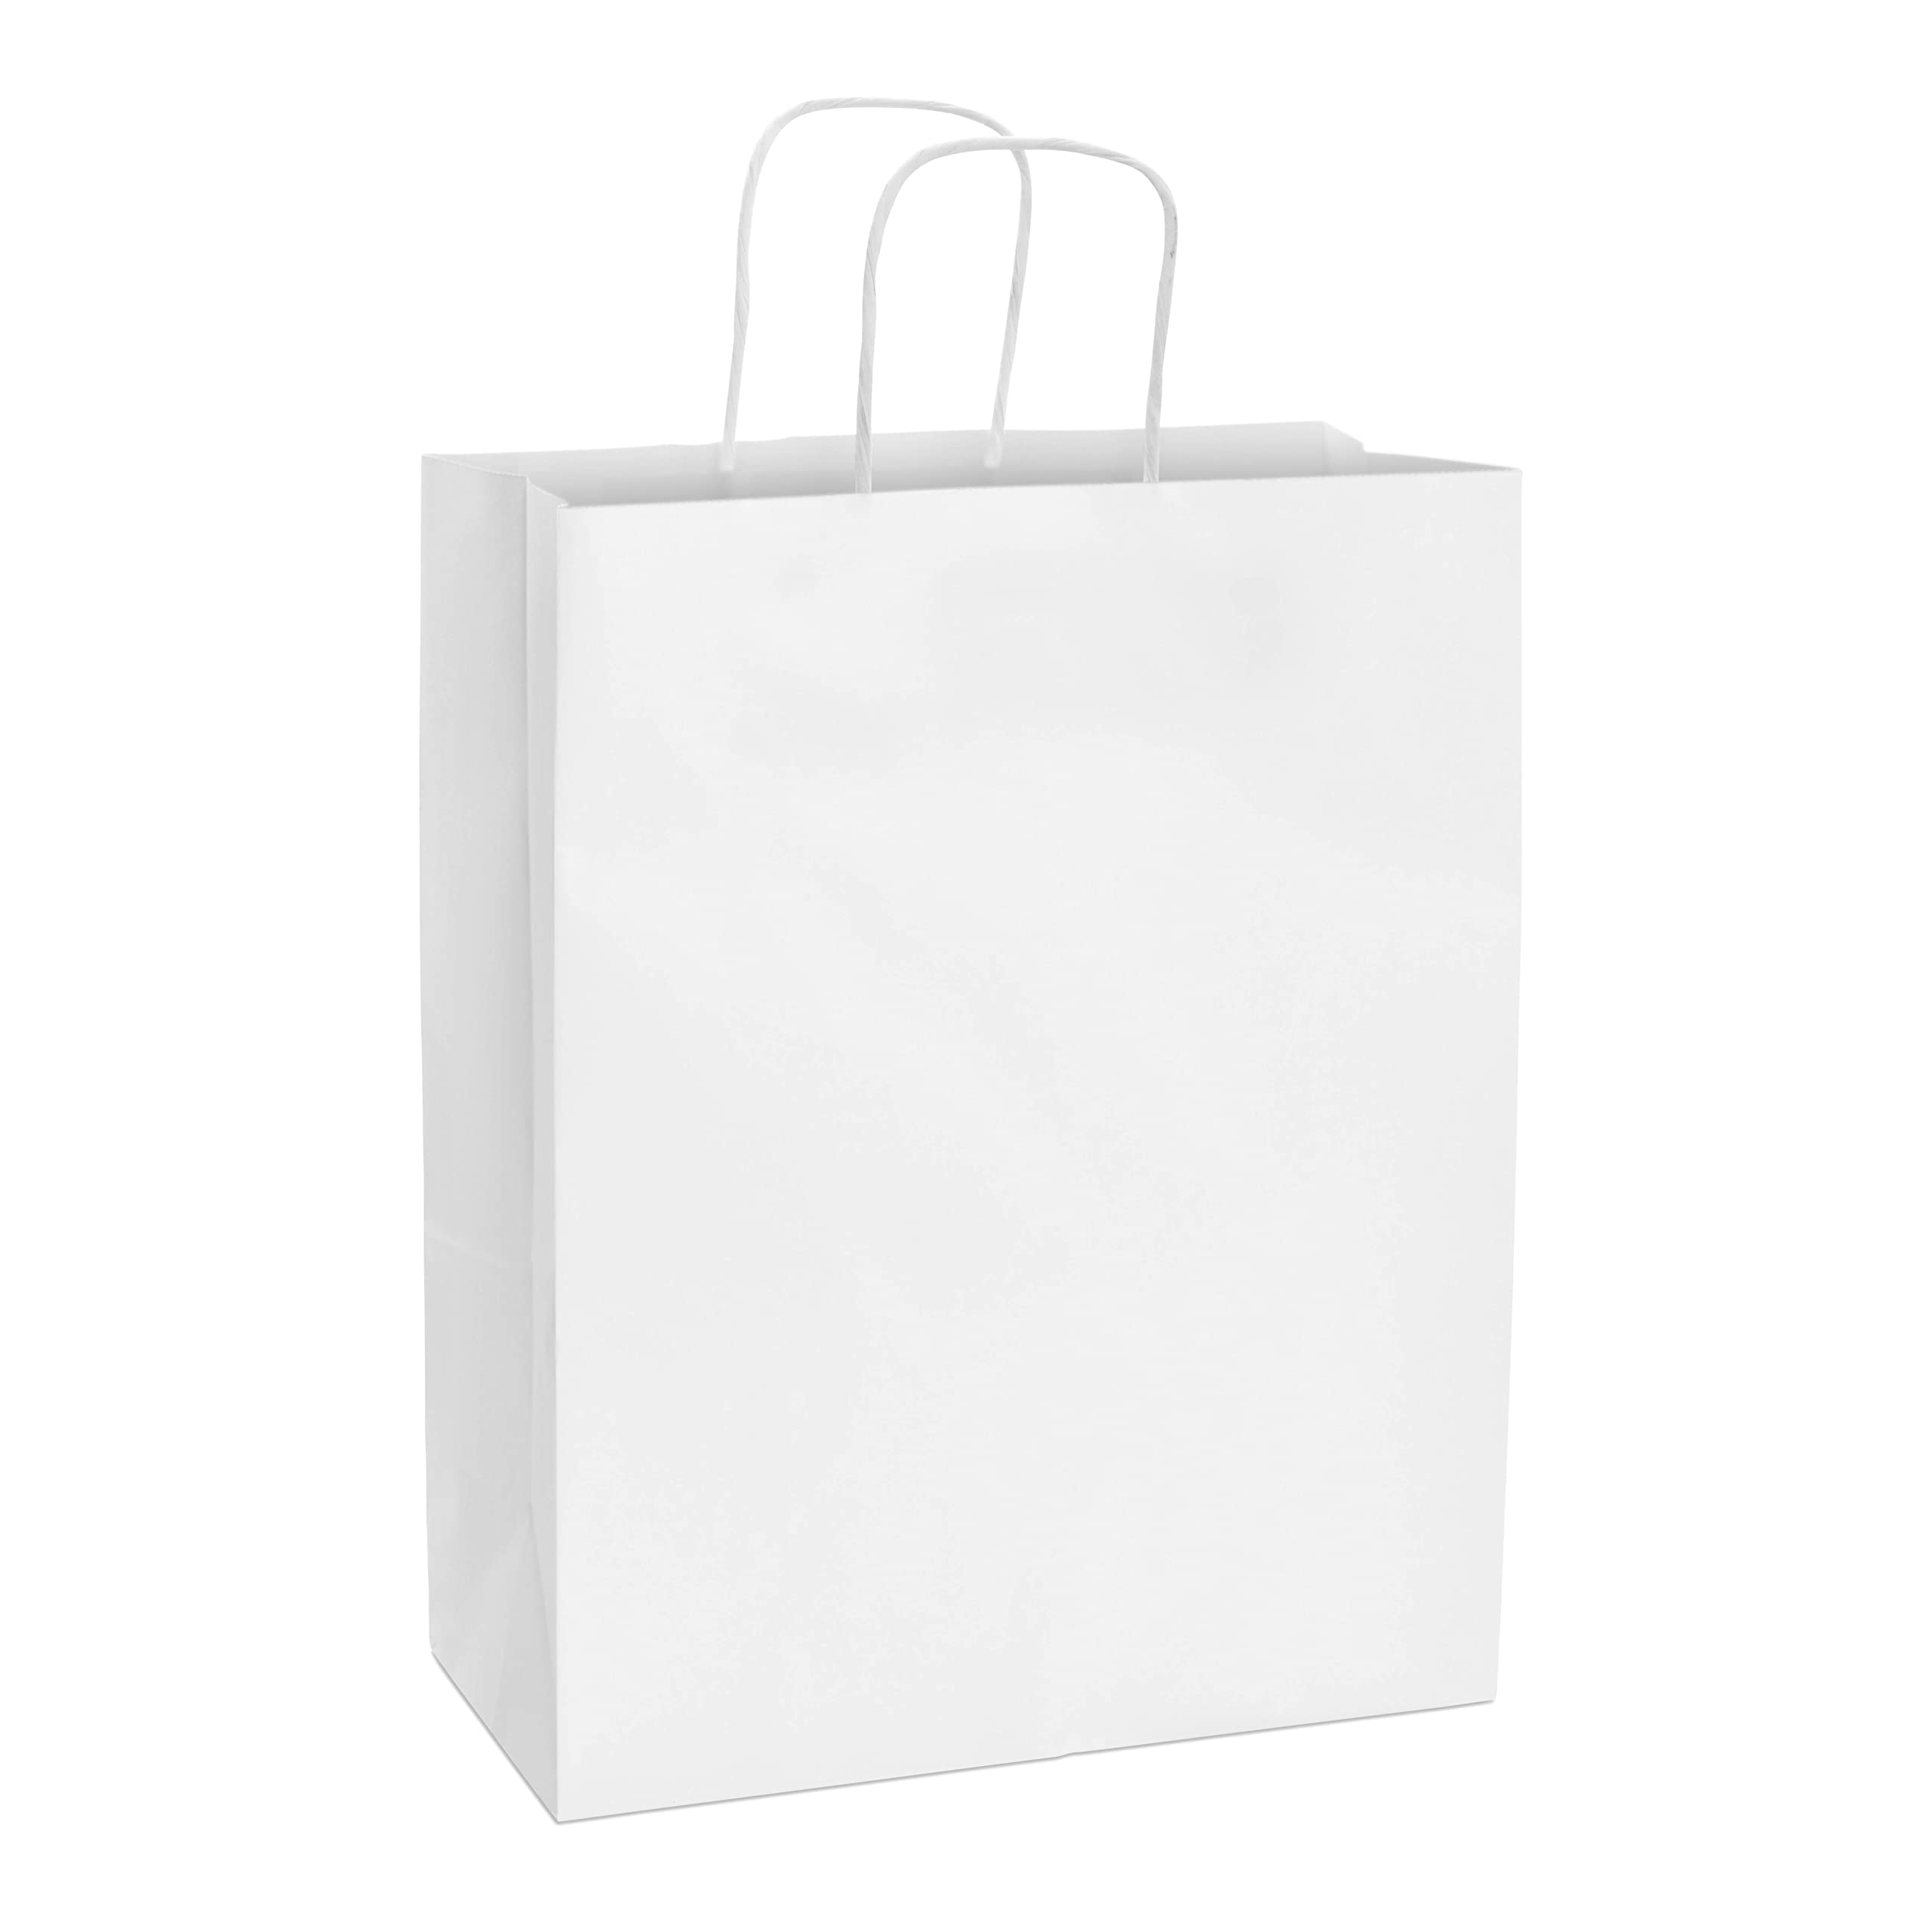 Paper Bag Photos, Download The BEST Free Paper Bag Stock Photos & HD Images